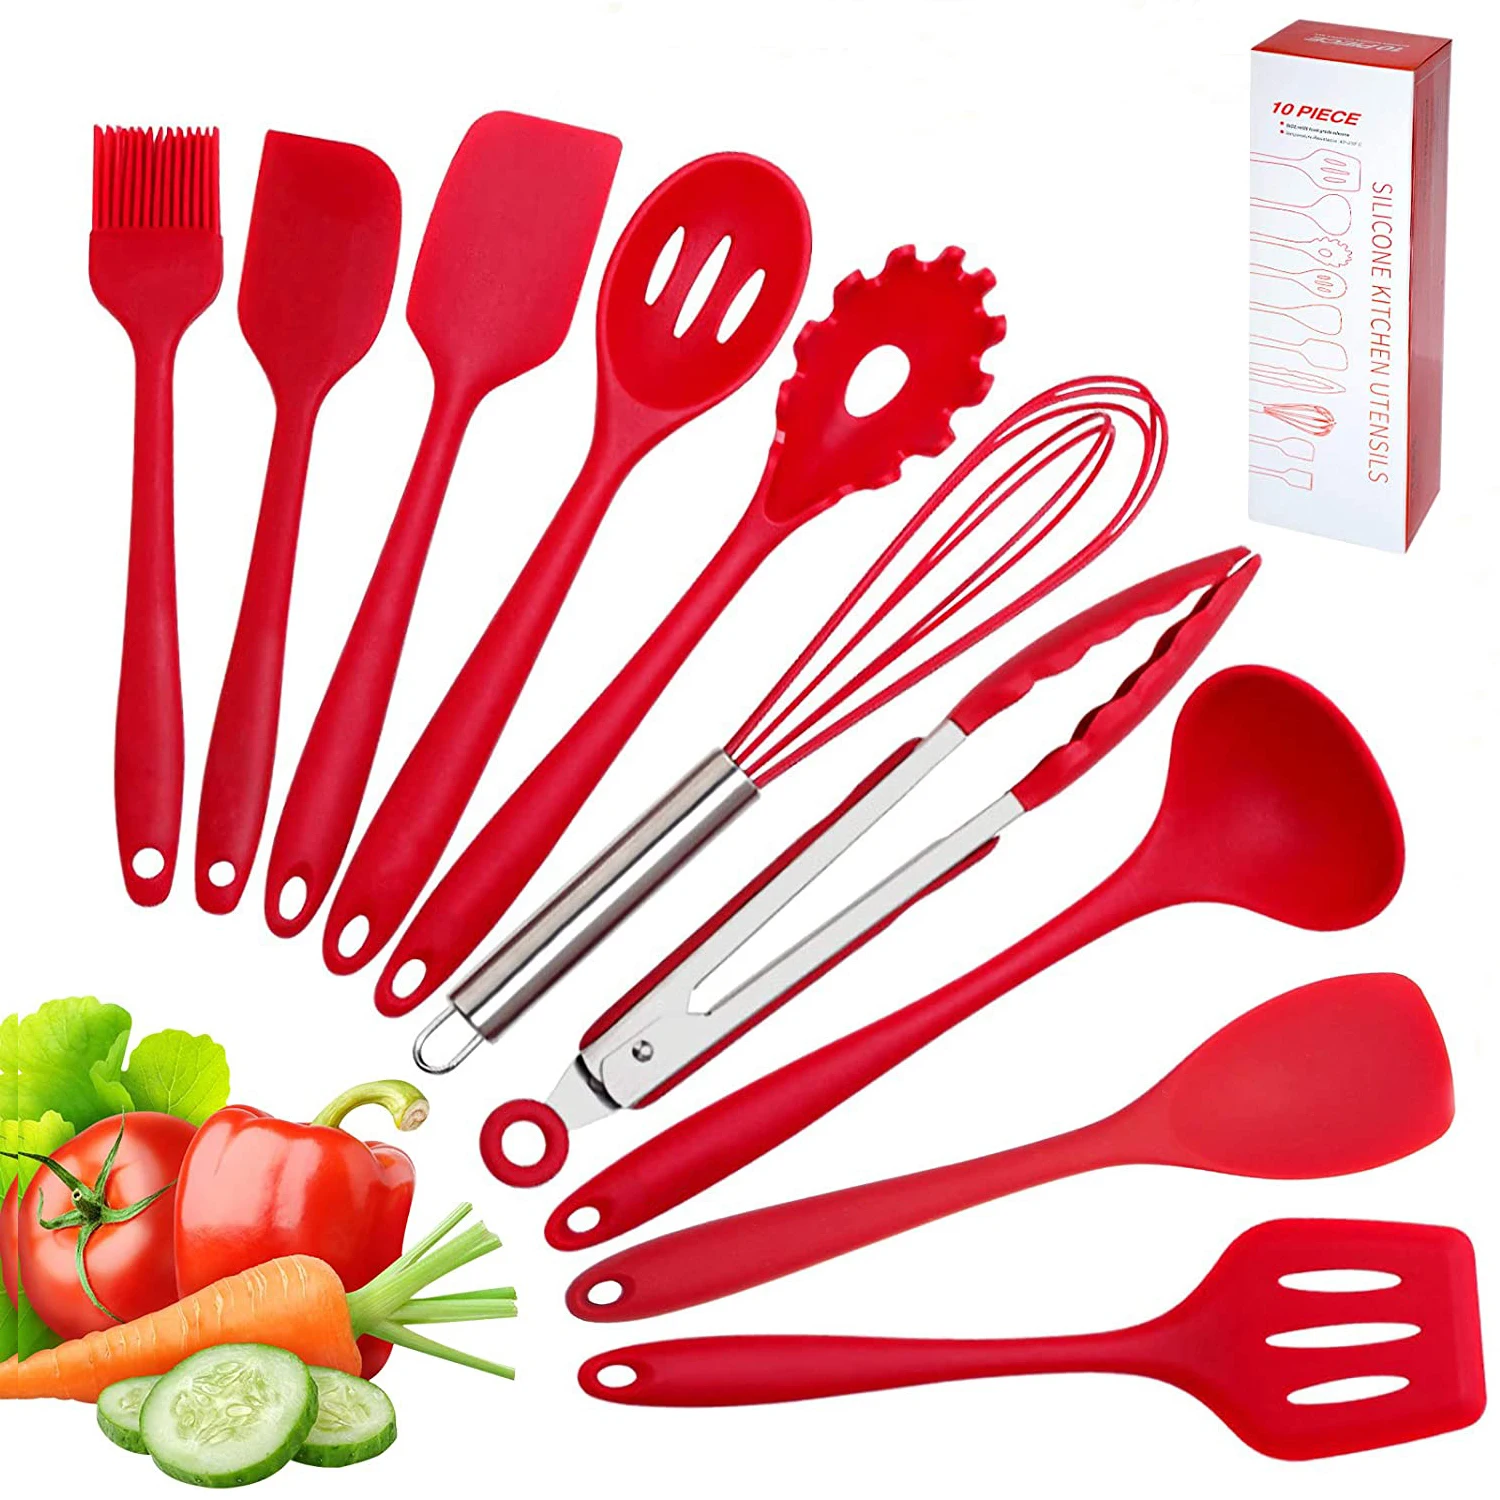 

Food Grade Heat Resistant 10 Piece Kitchenware Tool Spoon Whisk Tongs Non-stick Cooking Spatula Silicone Kitchen Utensil Set, Red, black